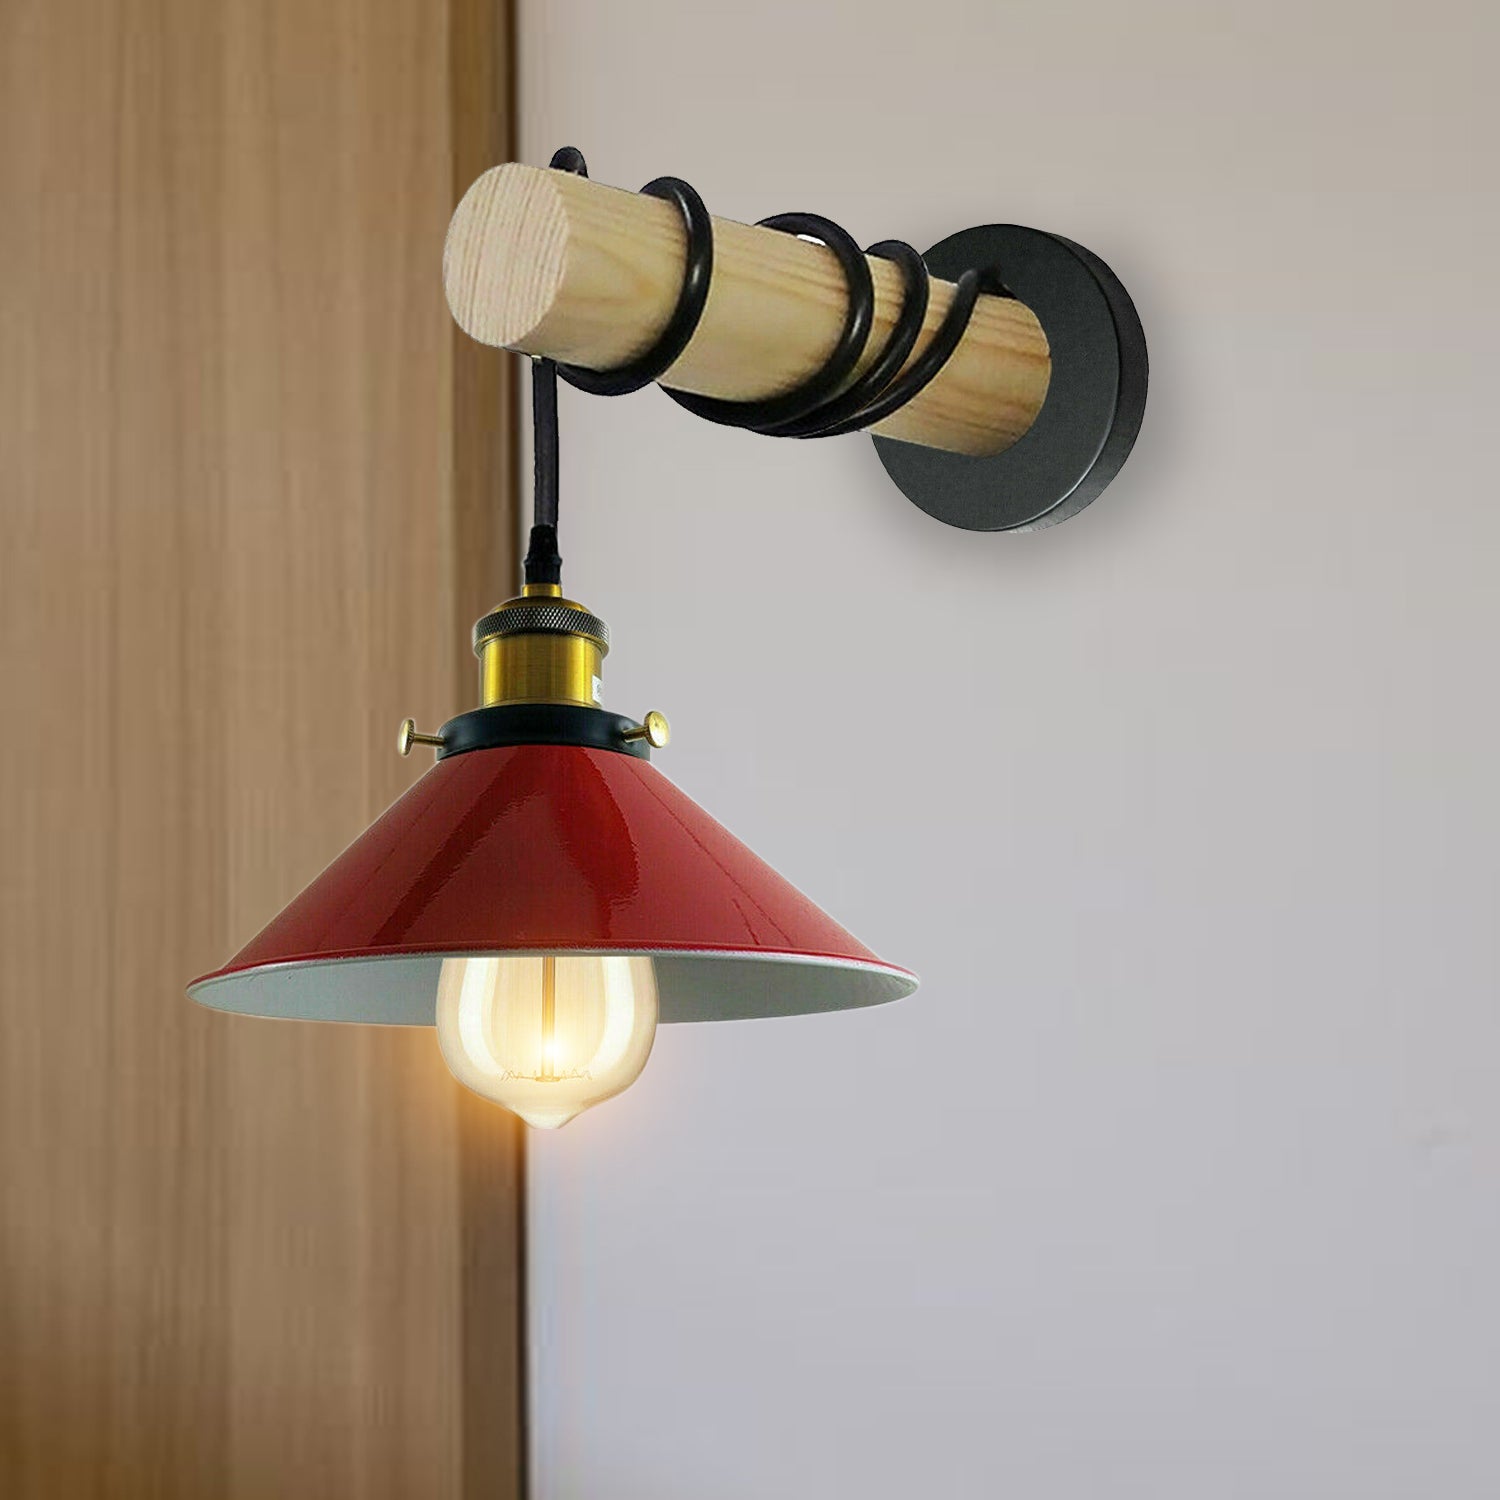 Modern Combined Solid Wooden Arm Chandelier Lighting With Red Cone Shaped Metal Shade wall sconce~3475 - LEDSone UK Ltd